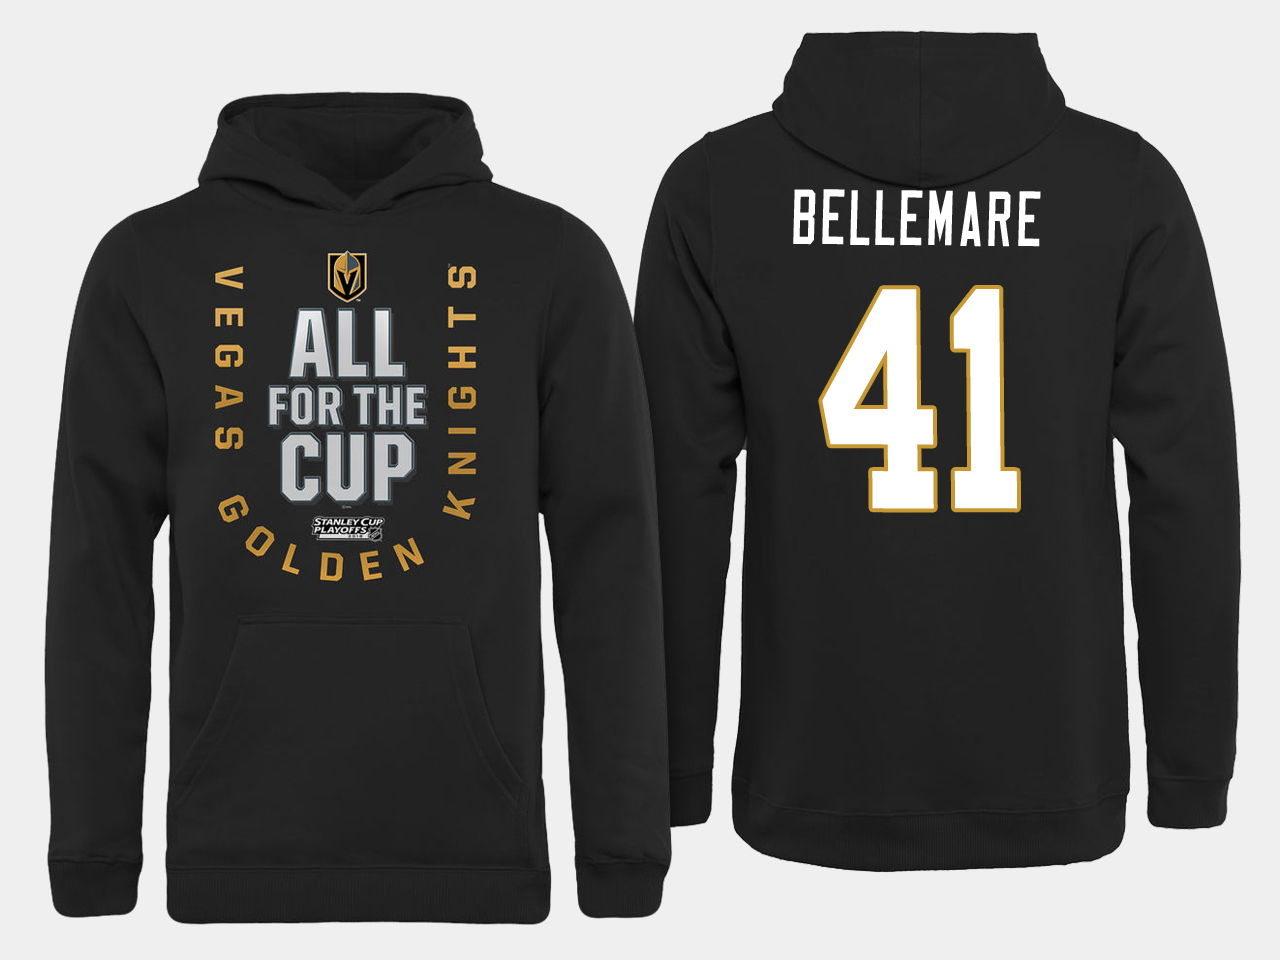 Men NHL Vegas Golden Knights 41 Bellemare All for the Cup hoodie